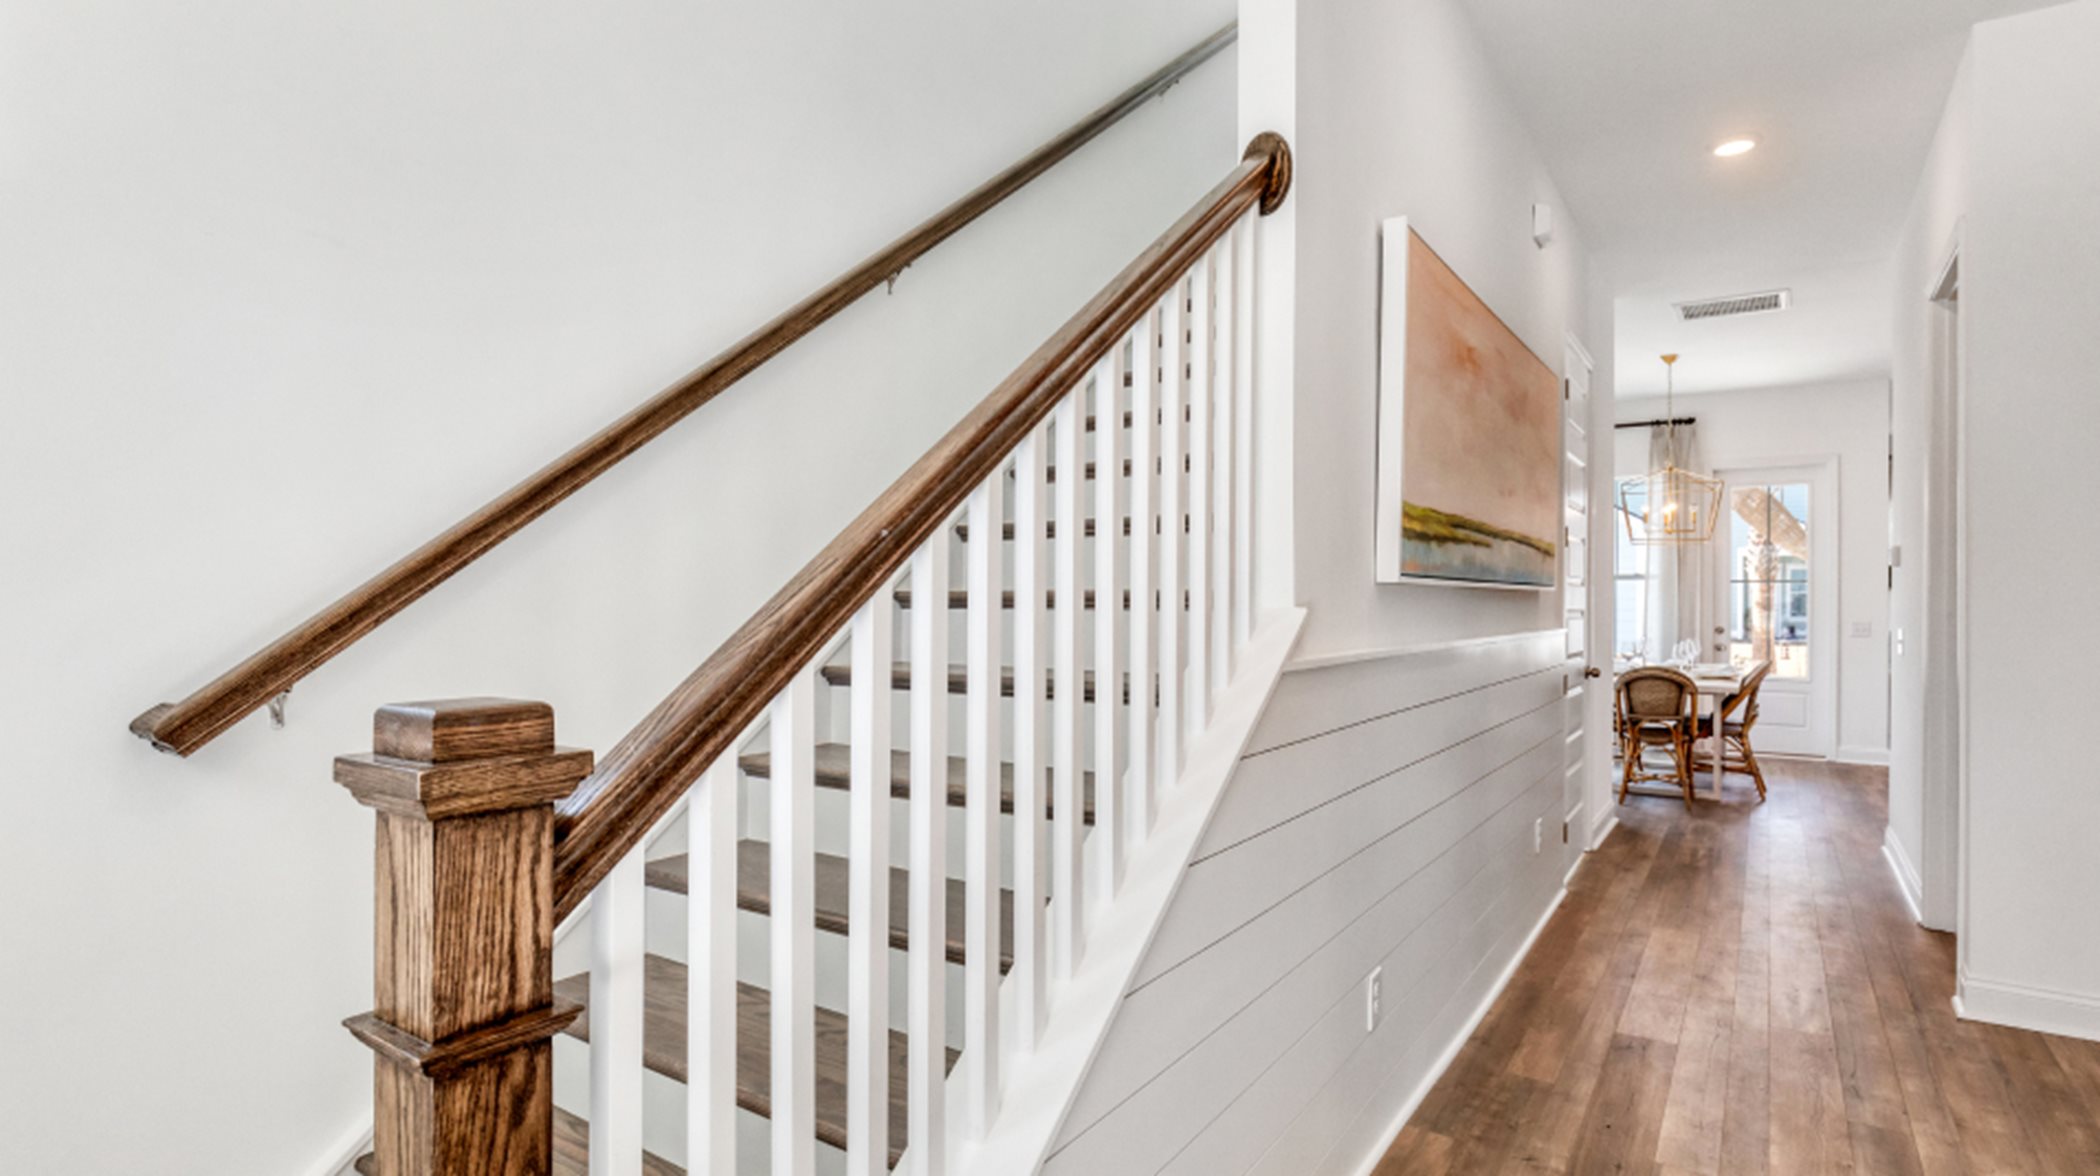 Stained oak stair treads and railing